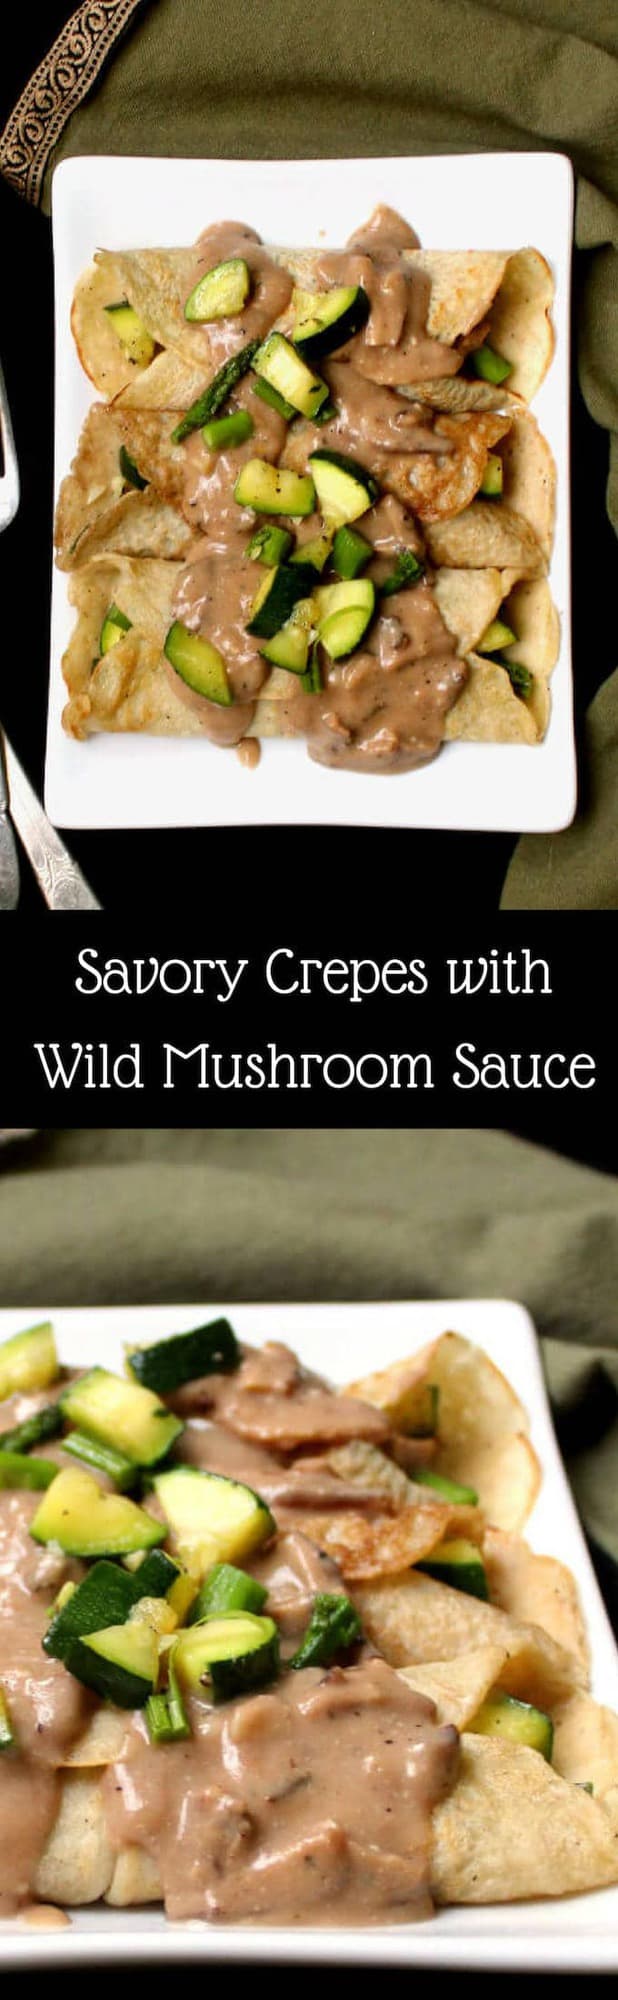 vegan crepes images with text inlay that says "savory crepes with wild mushroom sauce"